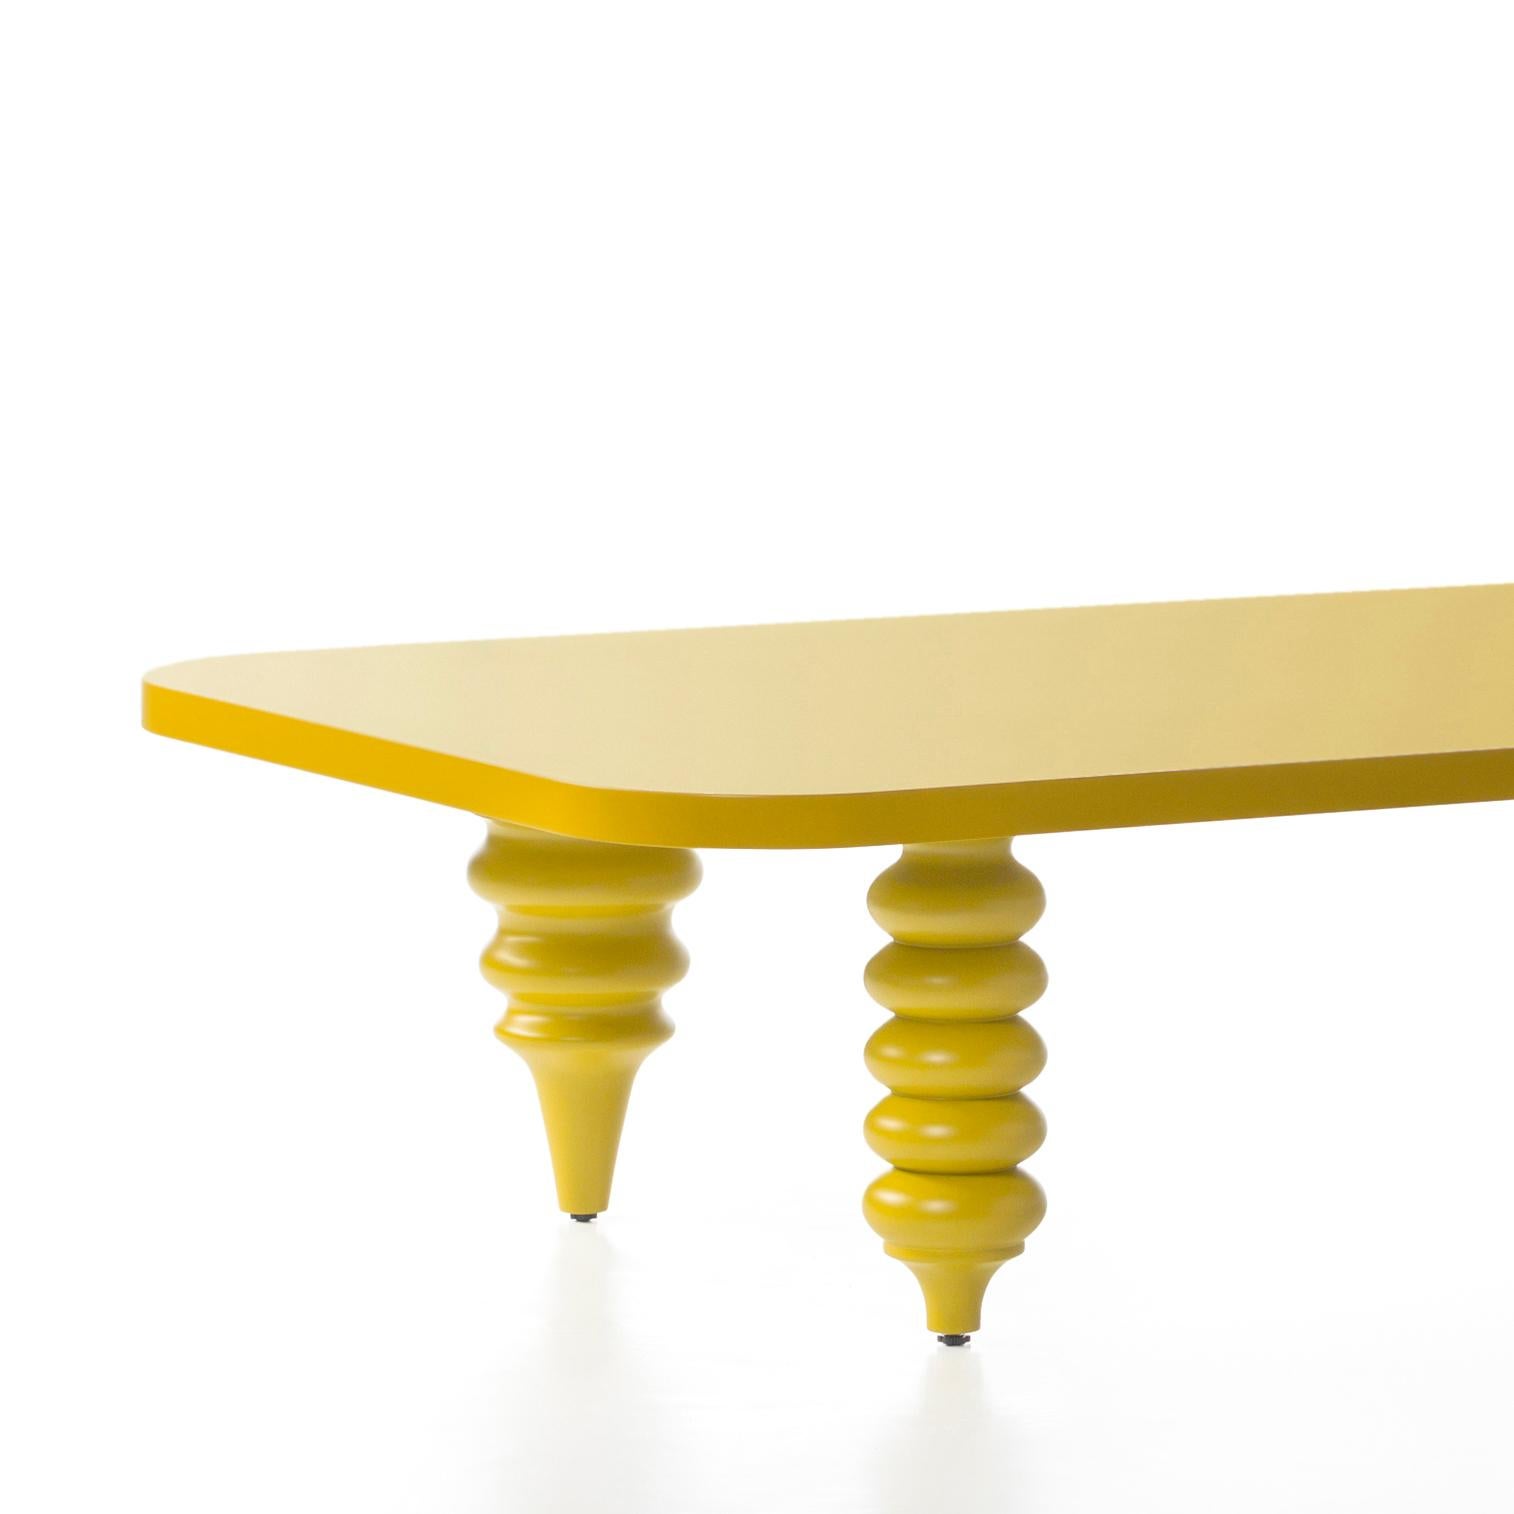 Low table designed by Jaime Hayon manufactured In Barcelona by BD

MDF base and legs in turned solid alder wood, lacquered in yellow 

Measures: 50 x 150 x H. 35 cm.